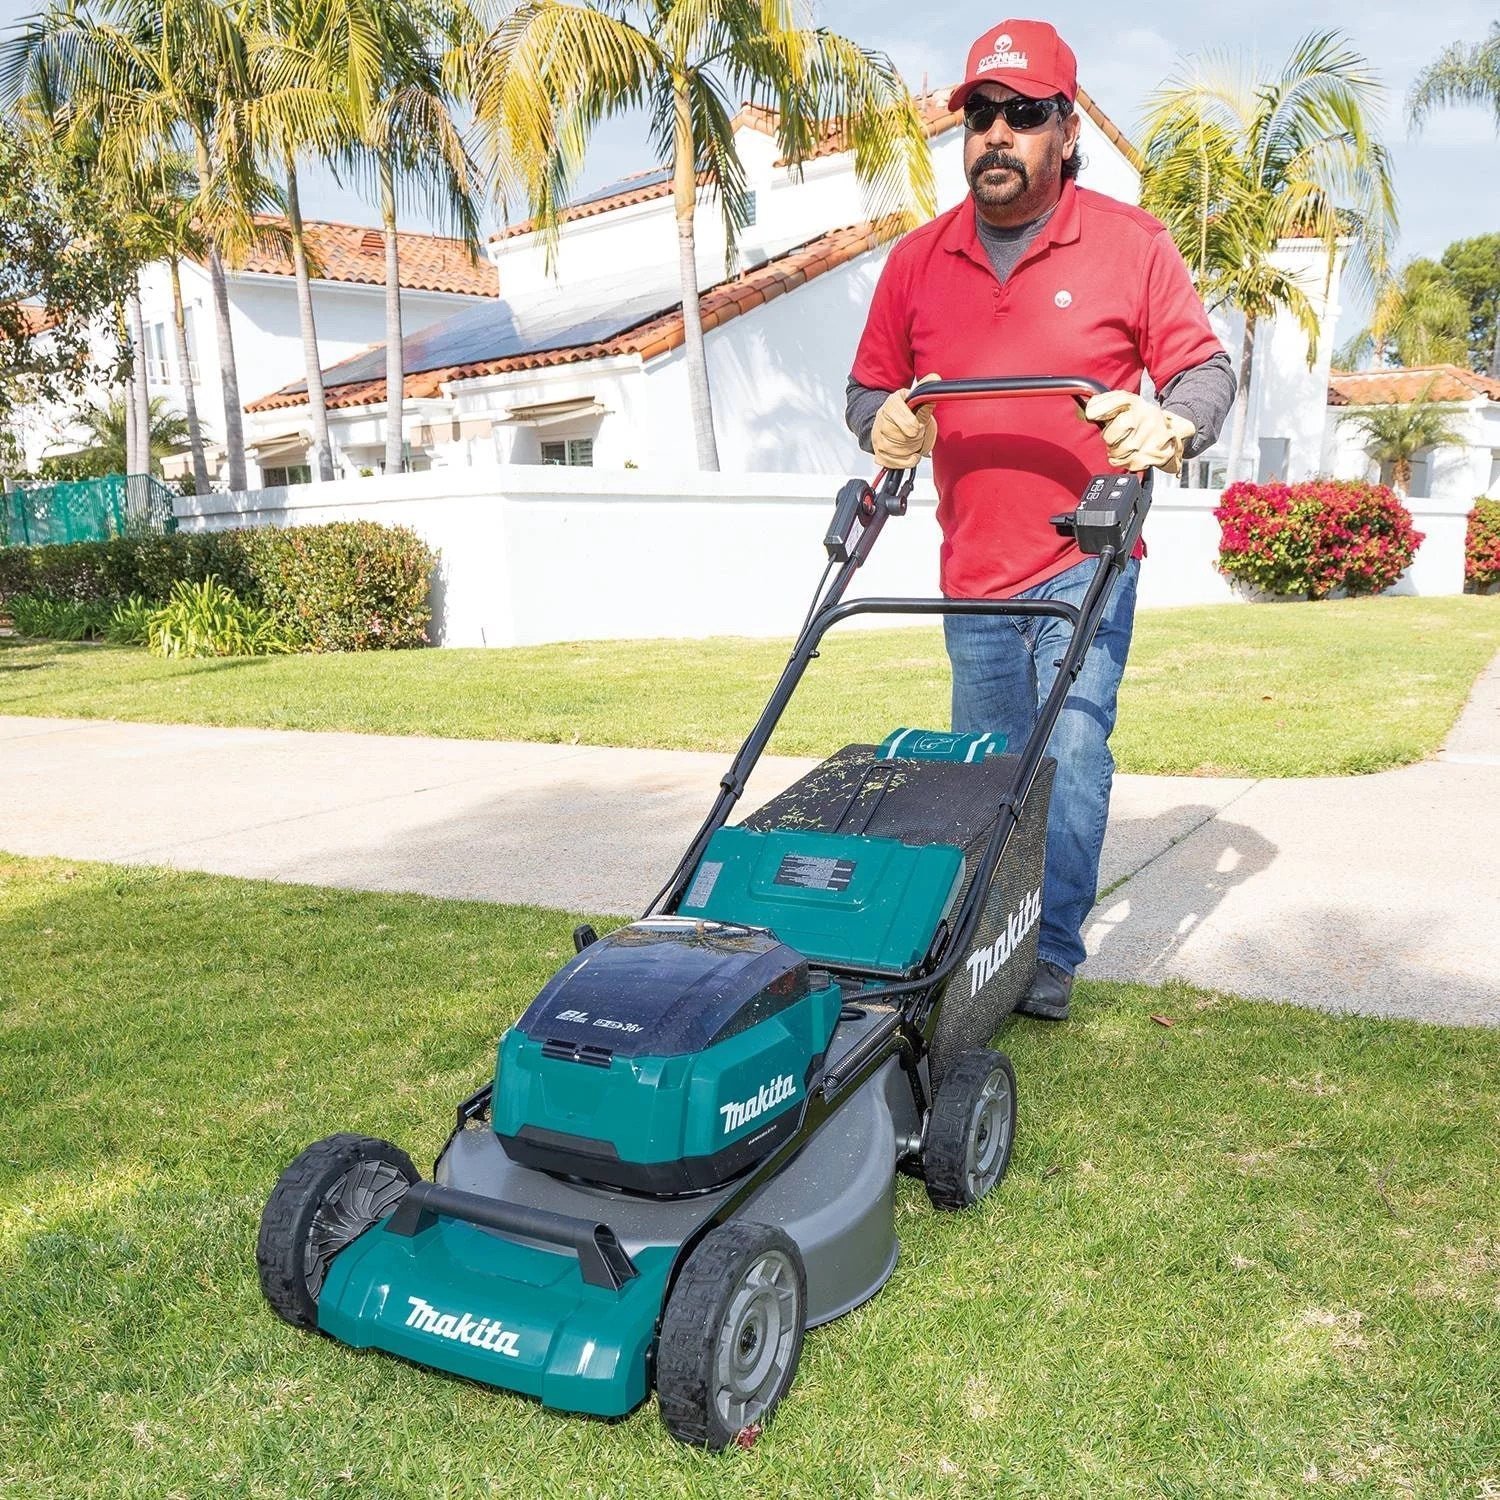 21 in. 18-Volt X2 (36-Volt) LXT Lithium-Ion Cordless Walk Behind Self Propelled Lawn Mower Kit with 4 Batteries (5.0 Ah)